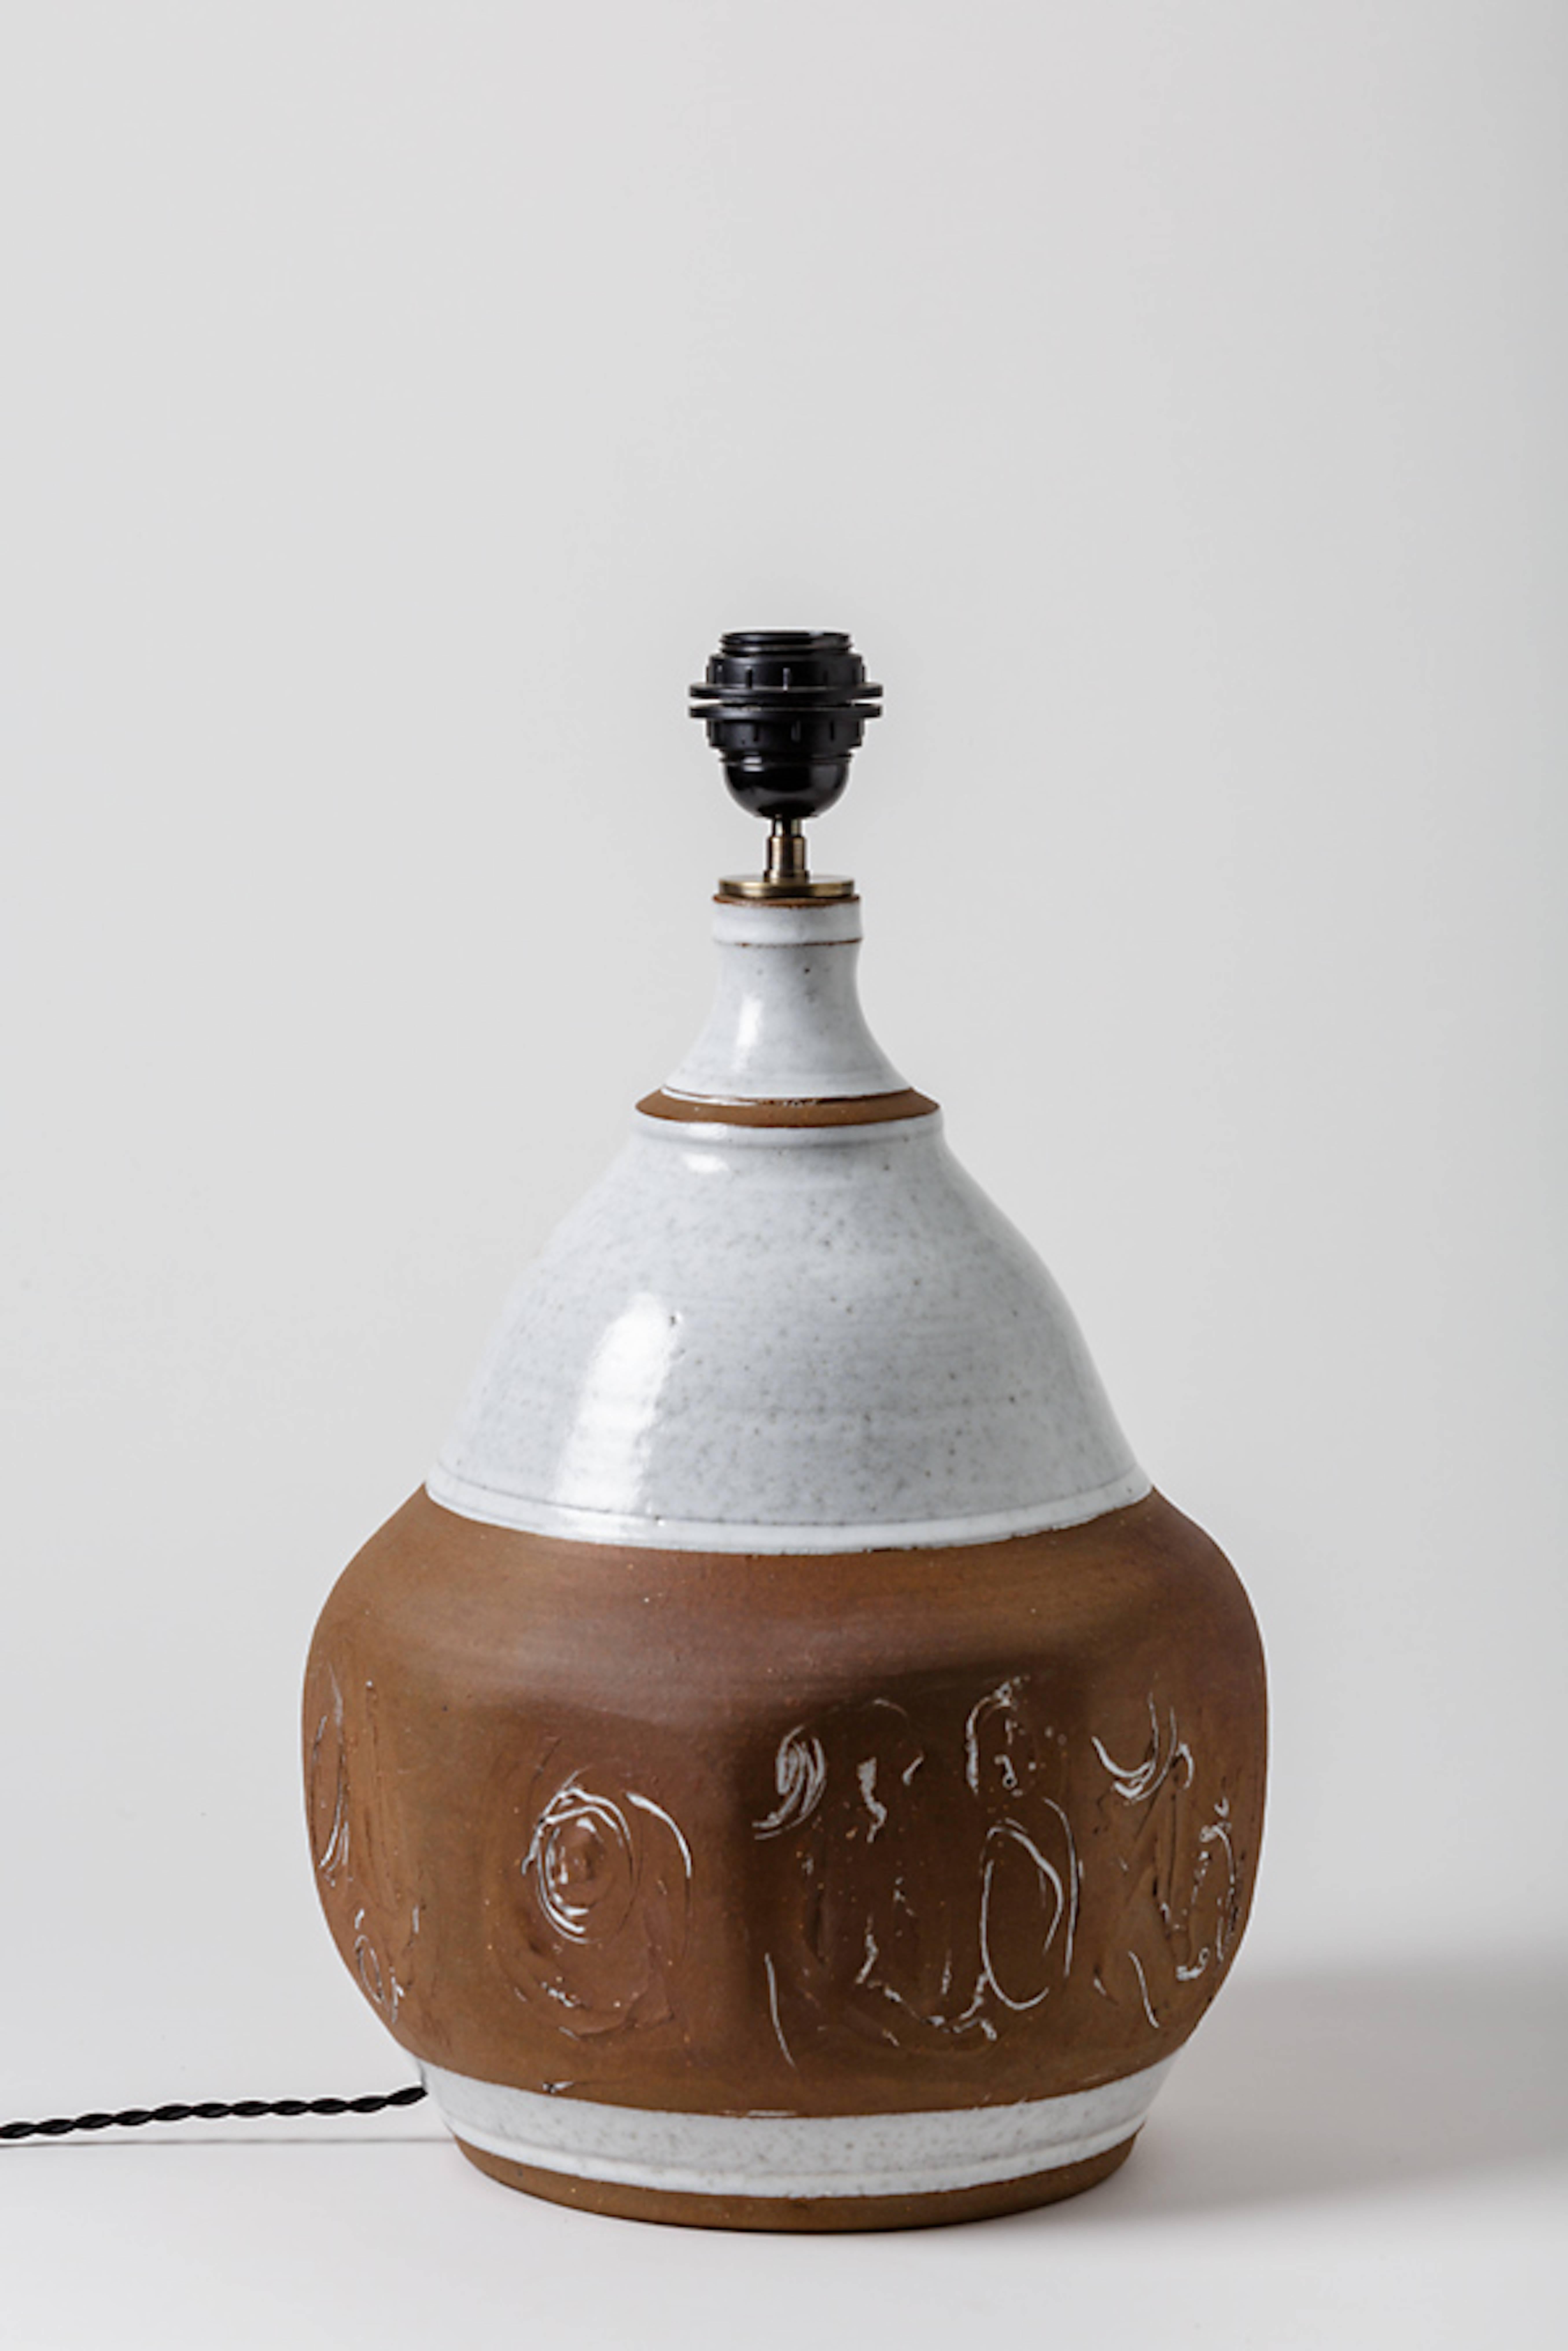 20th Century White and Brown Stoneware Ceramic Table Lamp by Roger Collet, circa 1970 For Sale